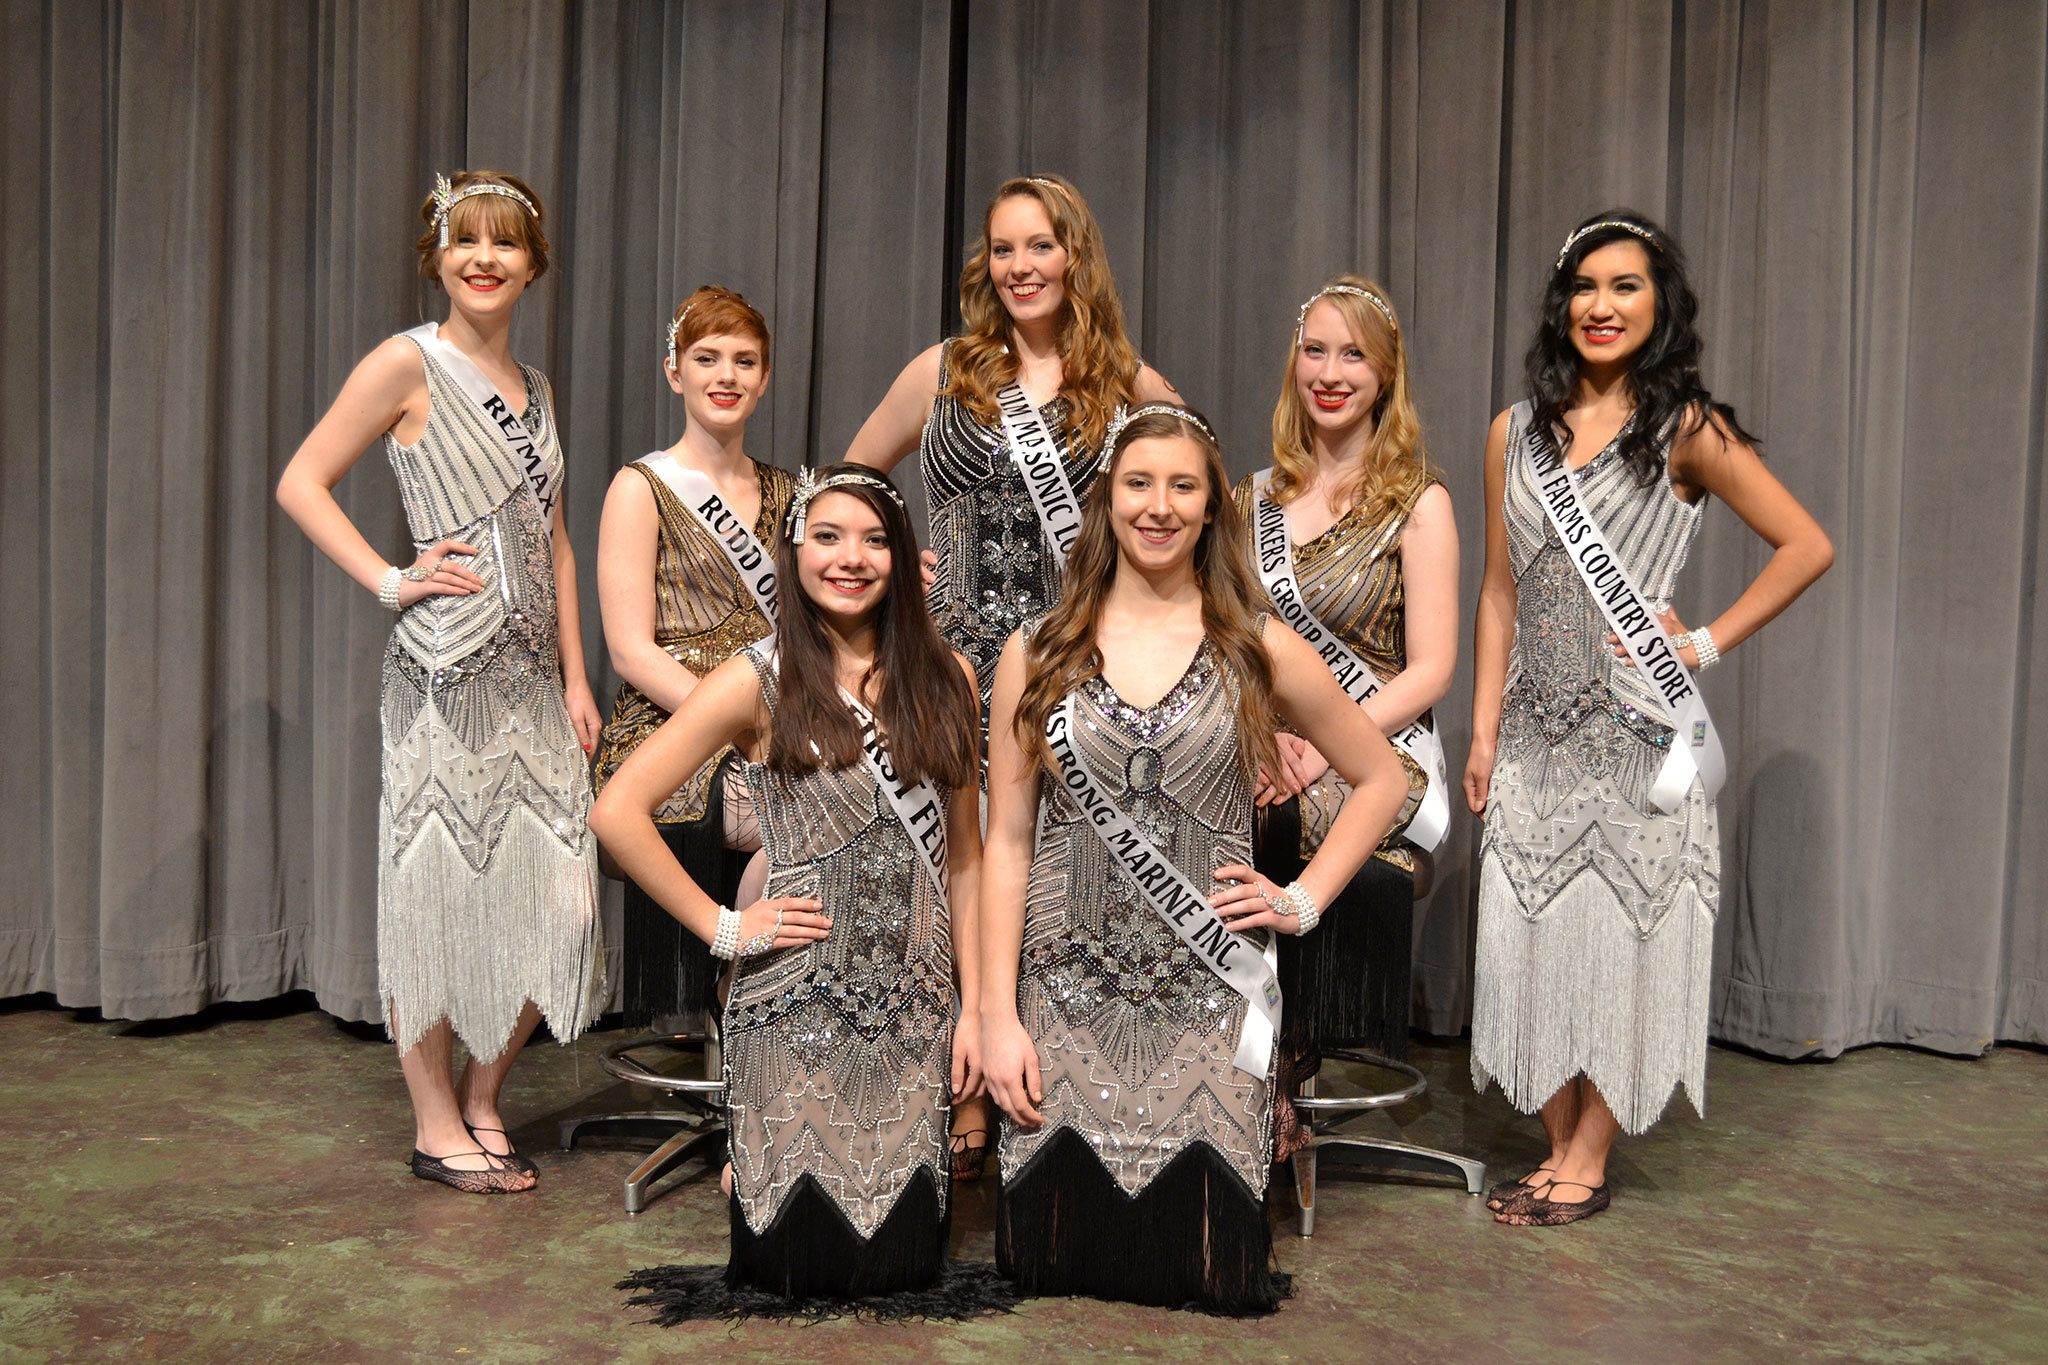 Sequim Irrigation Festival candidates are, from back left, Alison Cobb, Aubree Young, Cortney Gosset, Abby Norman, Karla Najera; in front left are Emily Straling and Kyla Armstrong. (Matthew Nash/Olympic Peninsula News Group)